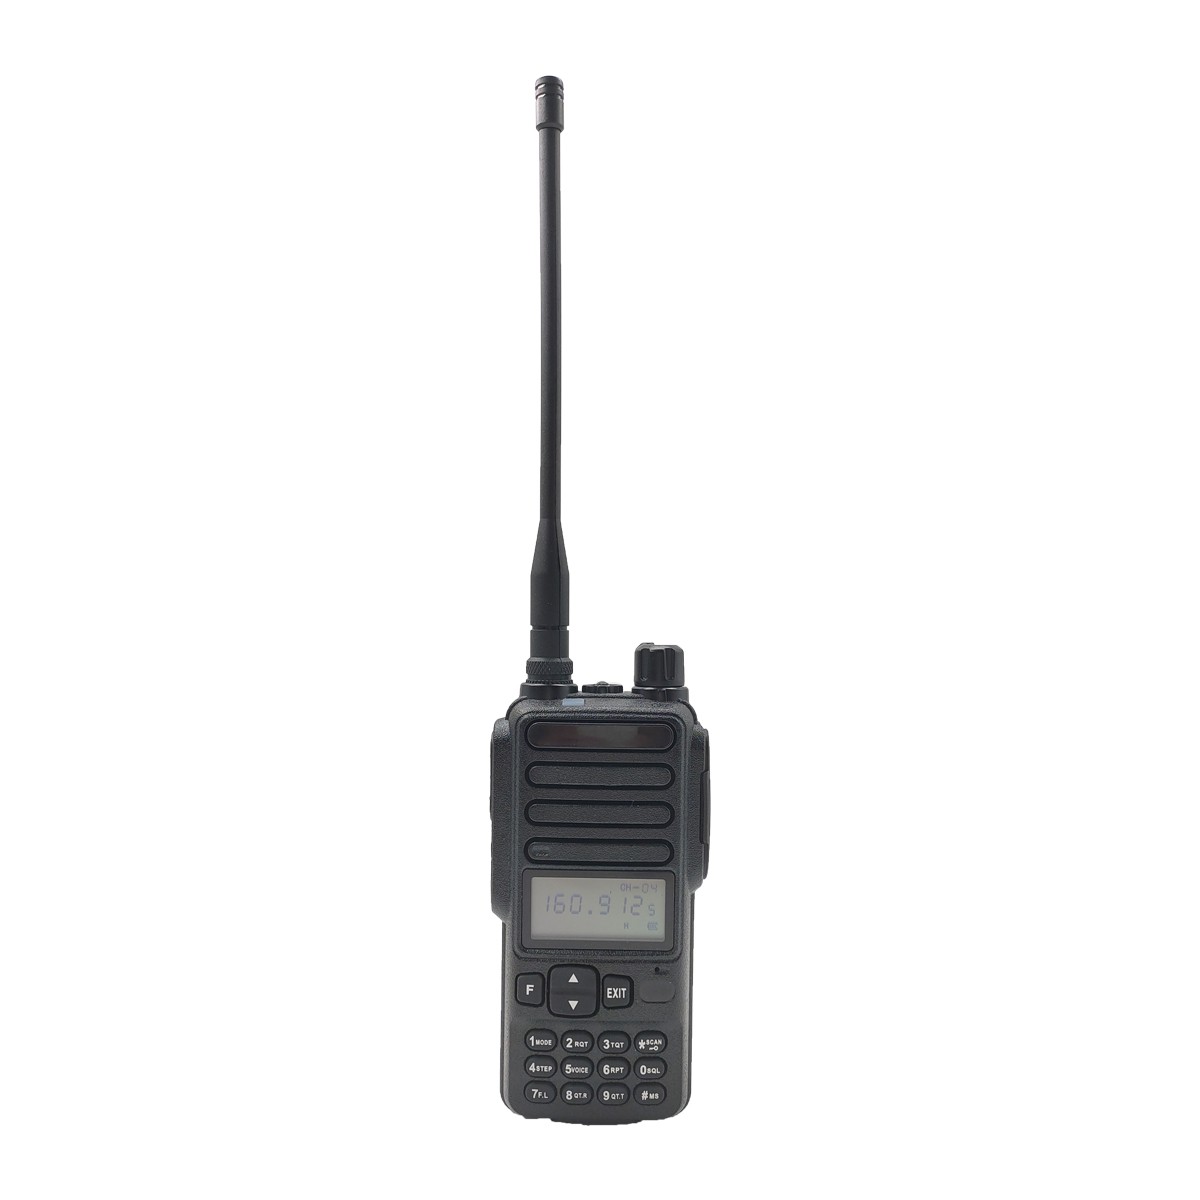 QYT nuovo vhf analogico uhf dual band 10w walkie talkie professionale AH-12H
